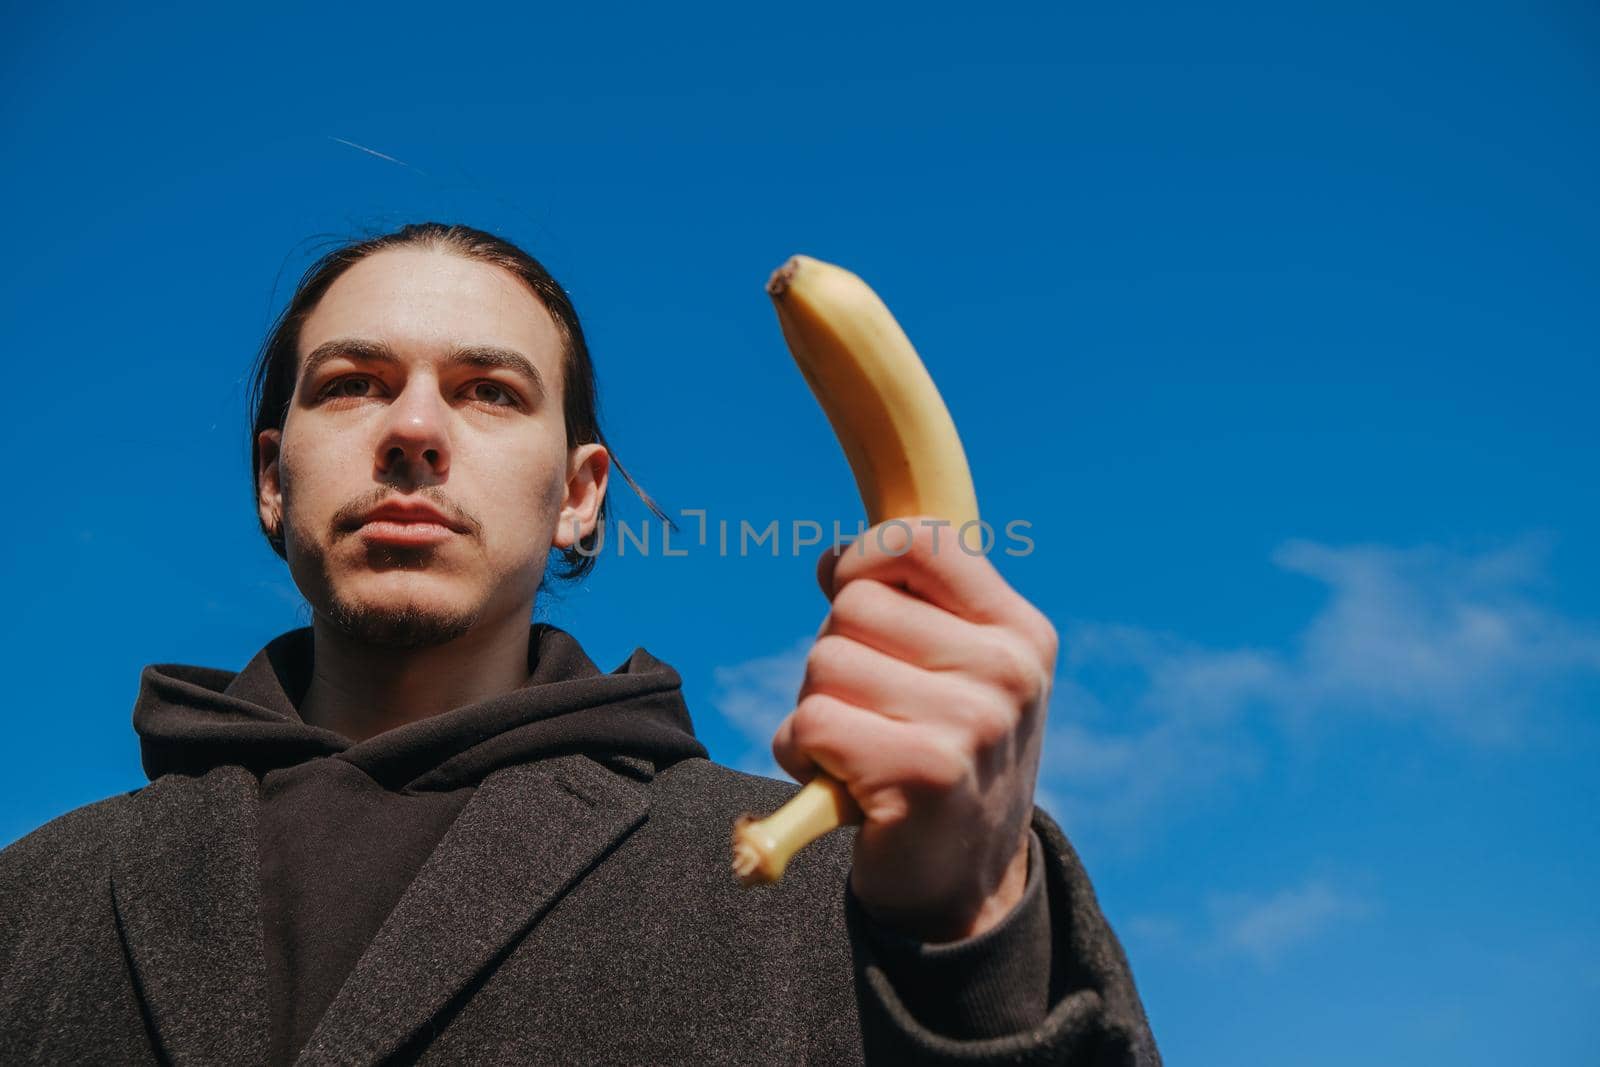 killer man with a banana instead of a gun. angry and confident look. Portrait of a nerd with mustache holding a banana weapon in his hand.